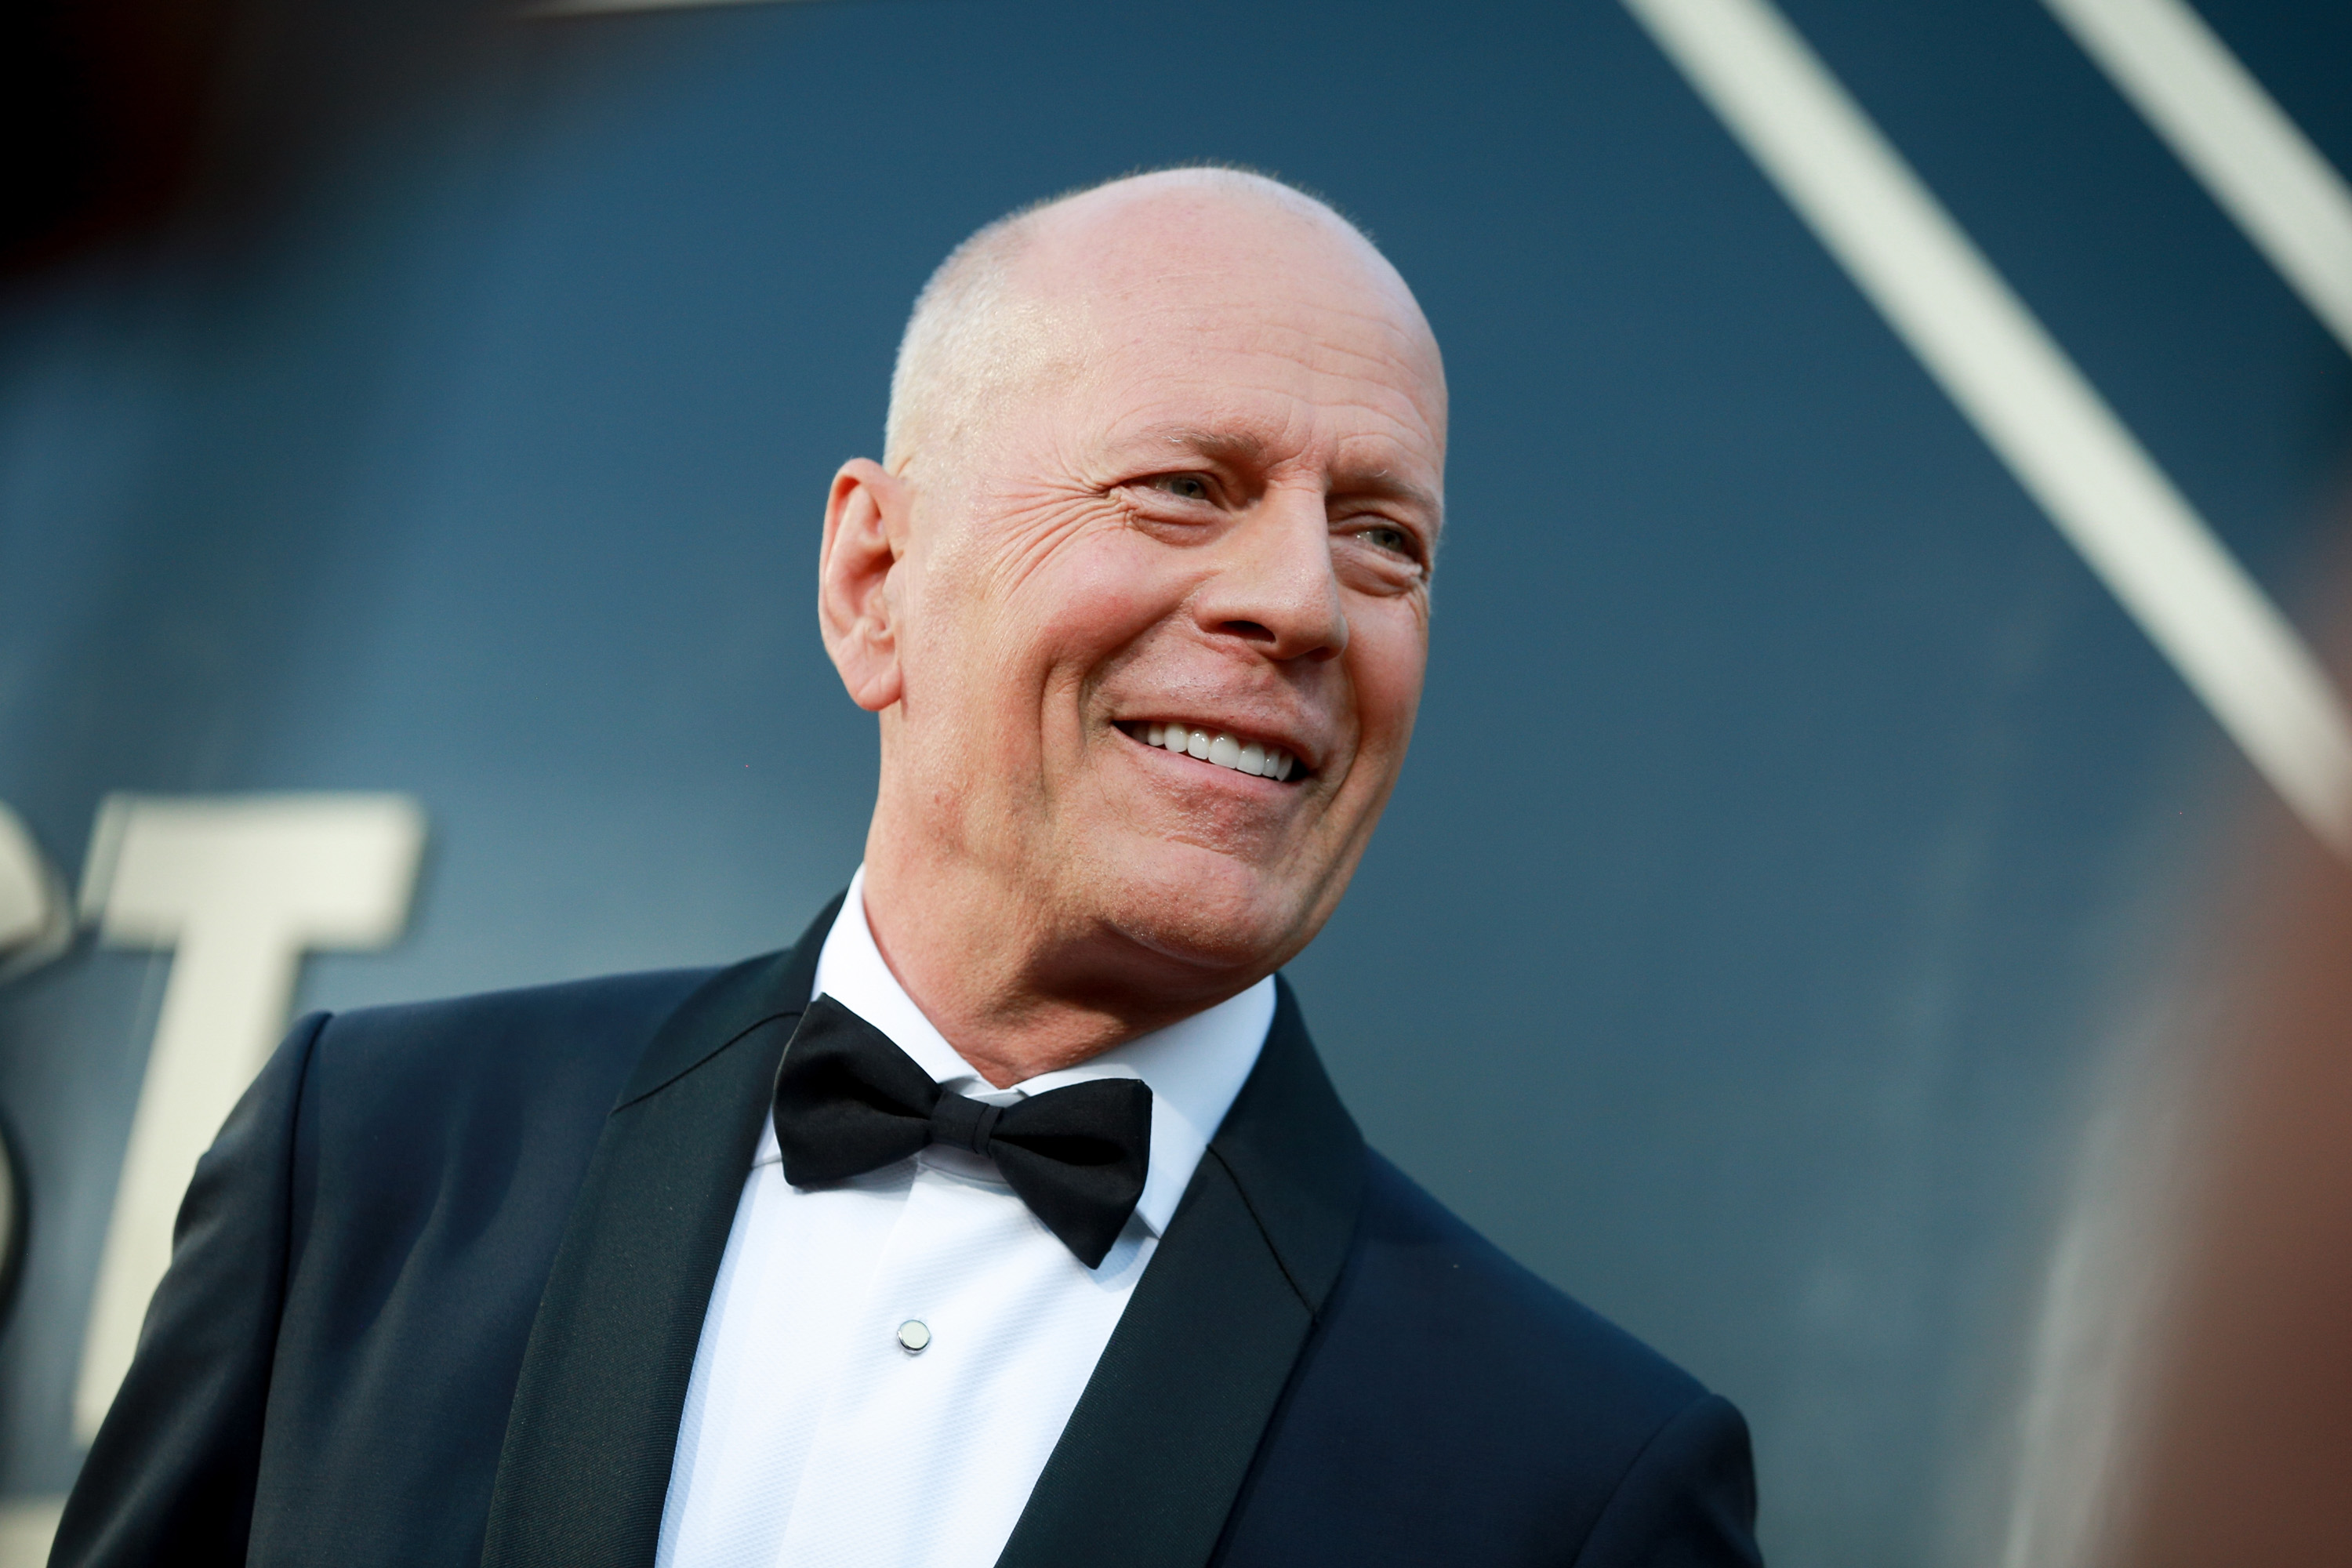 Bruce Willis wears a tuxedo and smiles.